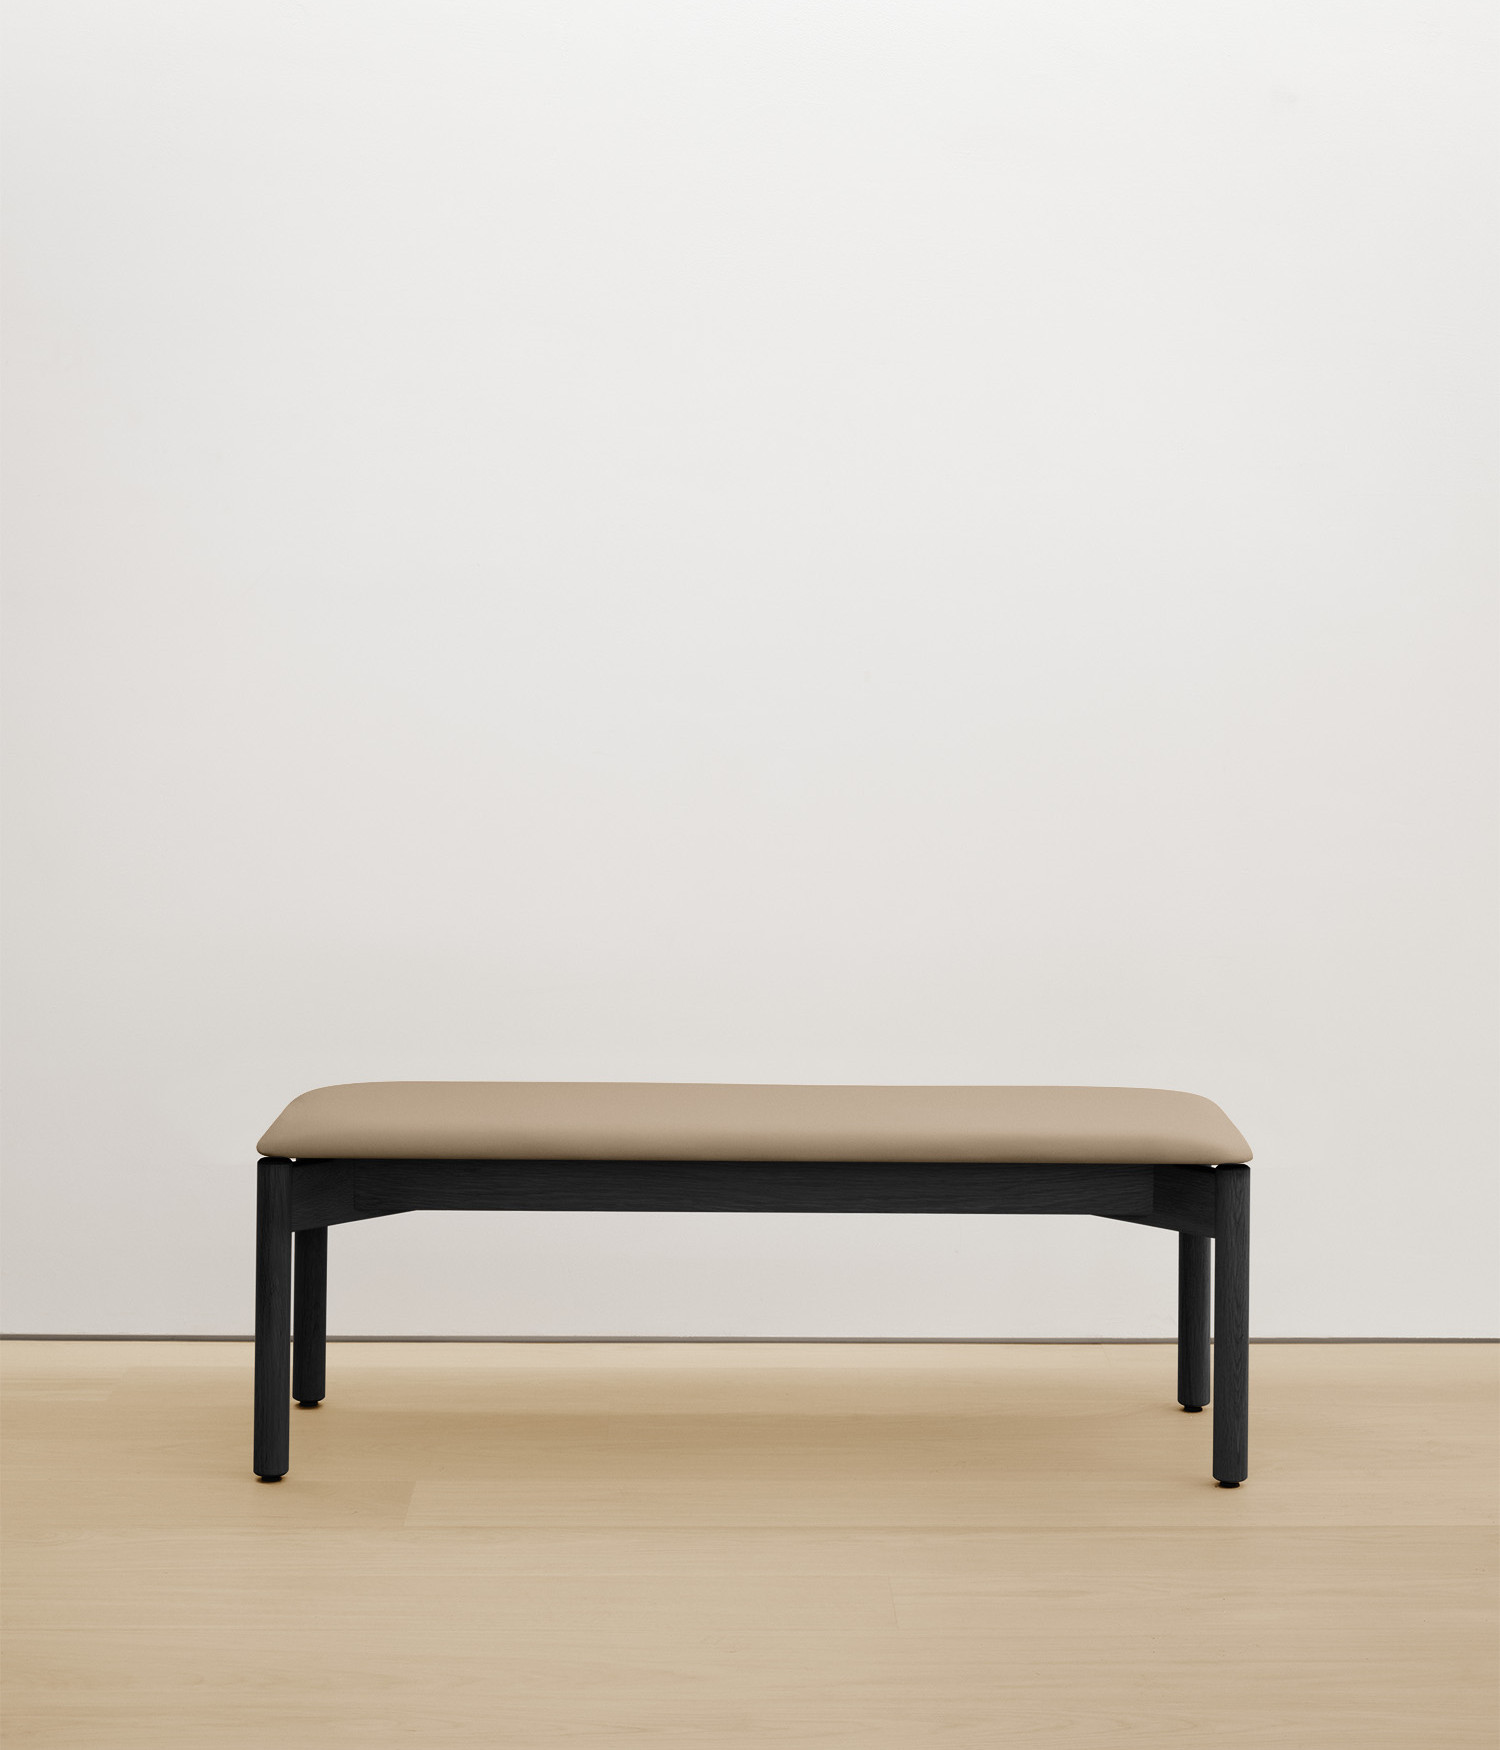 black-stained-oak bench with cream upholstered seat